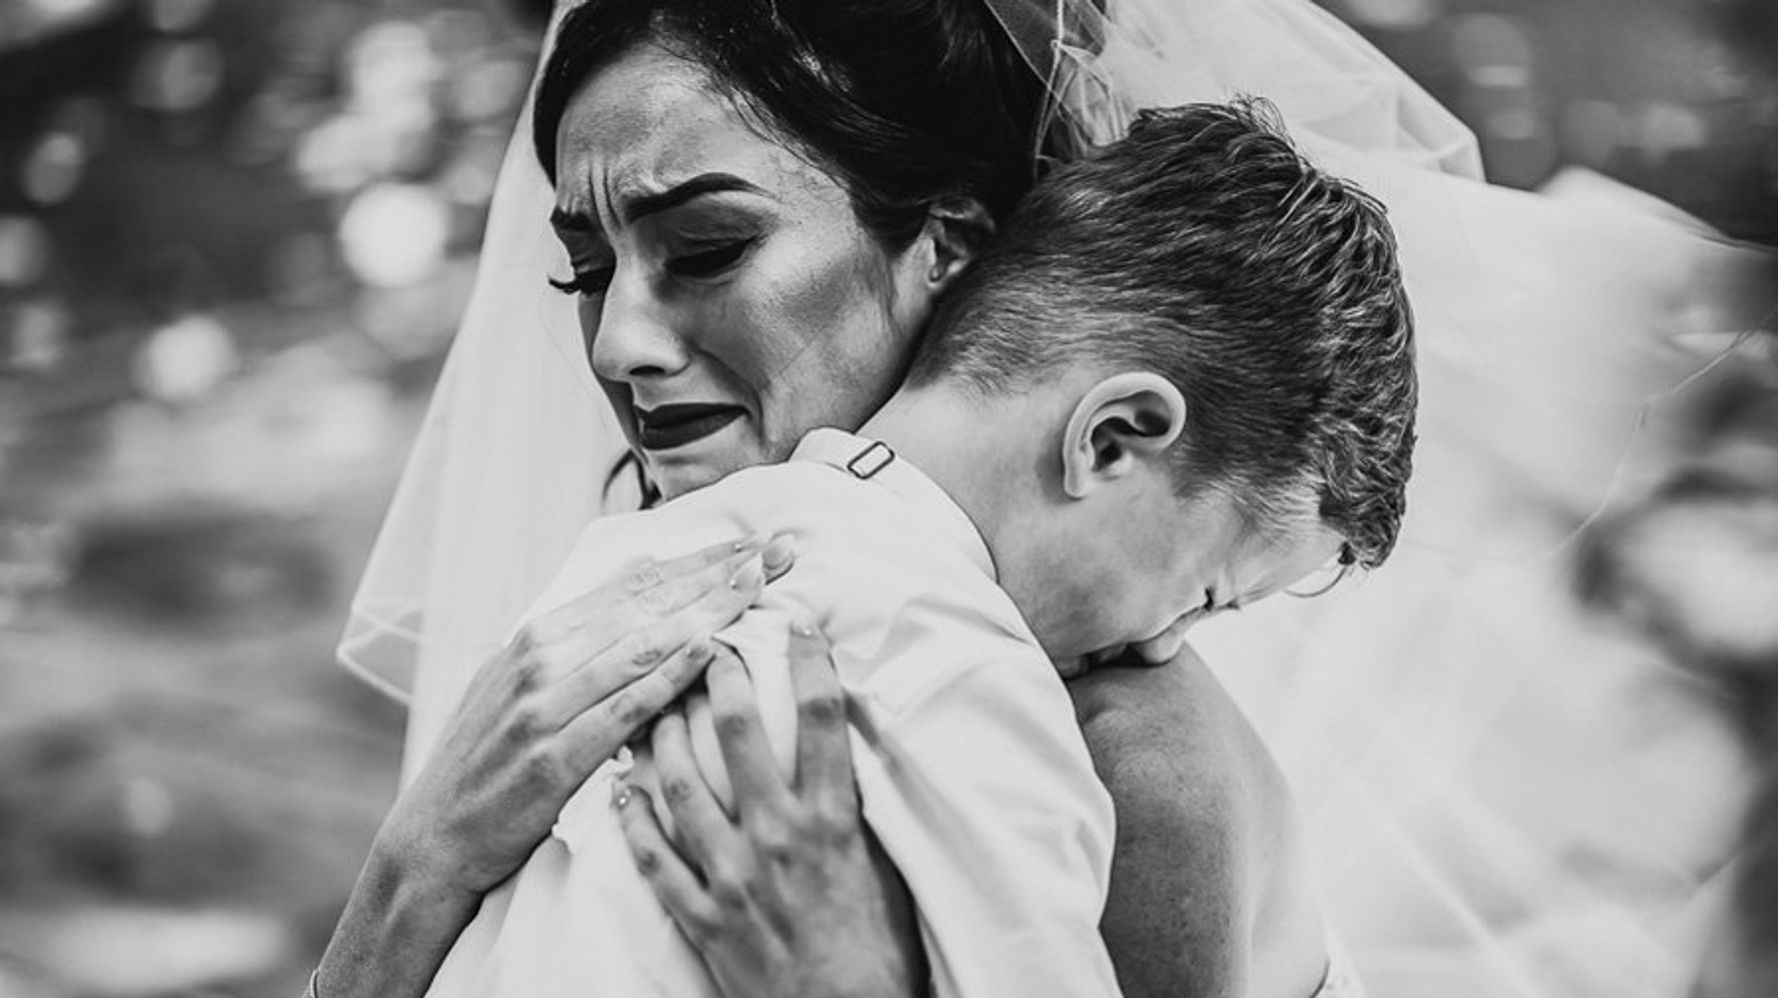 27 Award Winning Wedding Photos That Are Too Stunning To Look Away From